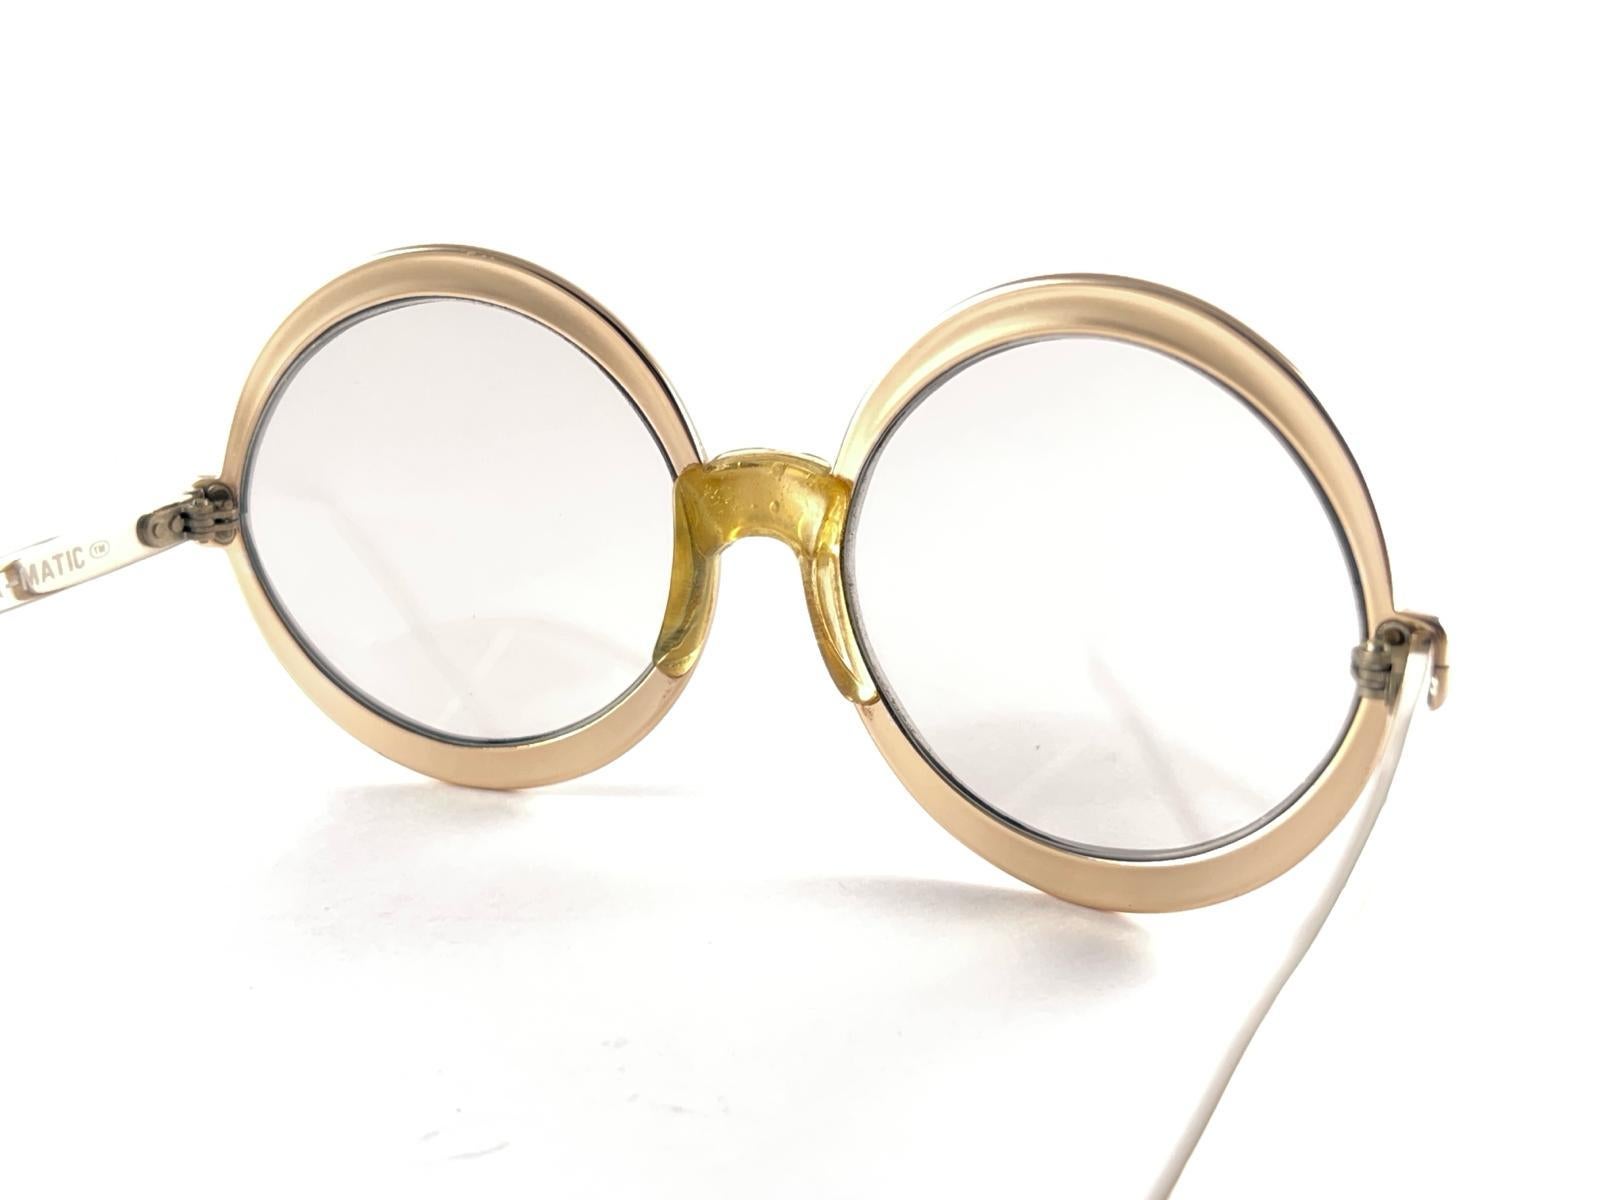 Vintage Renauld Round Gold Metallic Sunglasses 1980's Made in USA For Sale 4